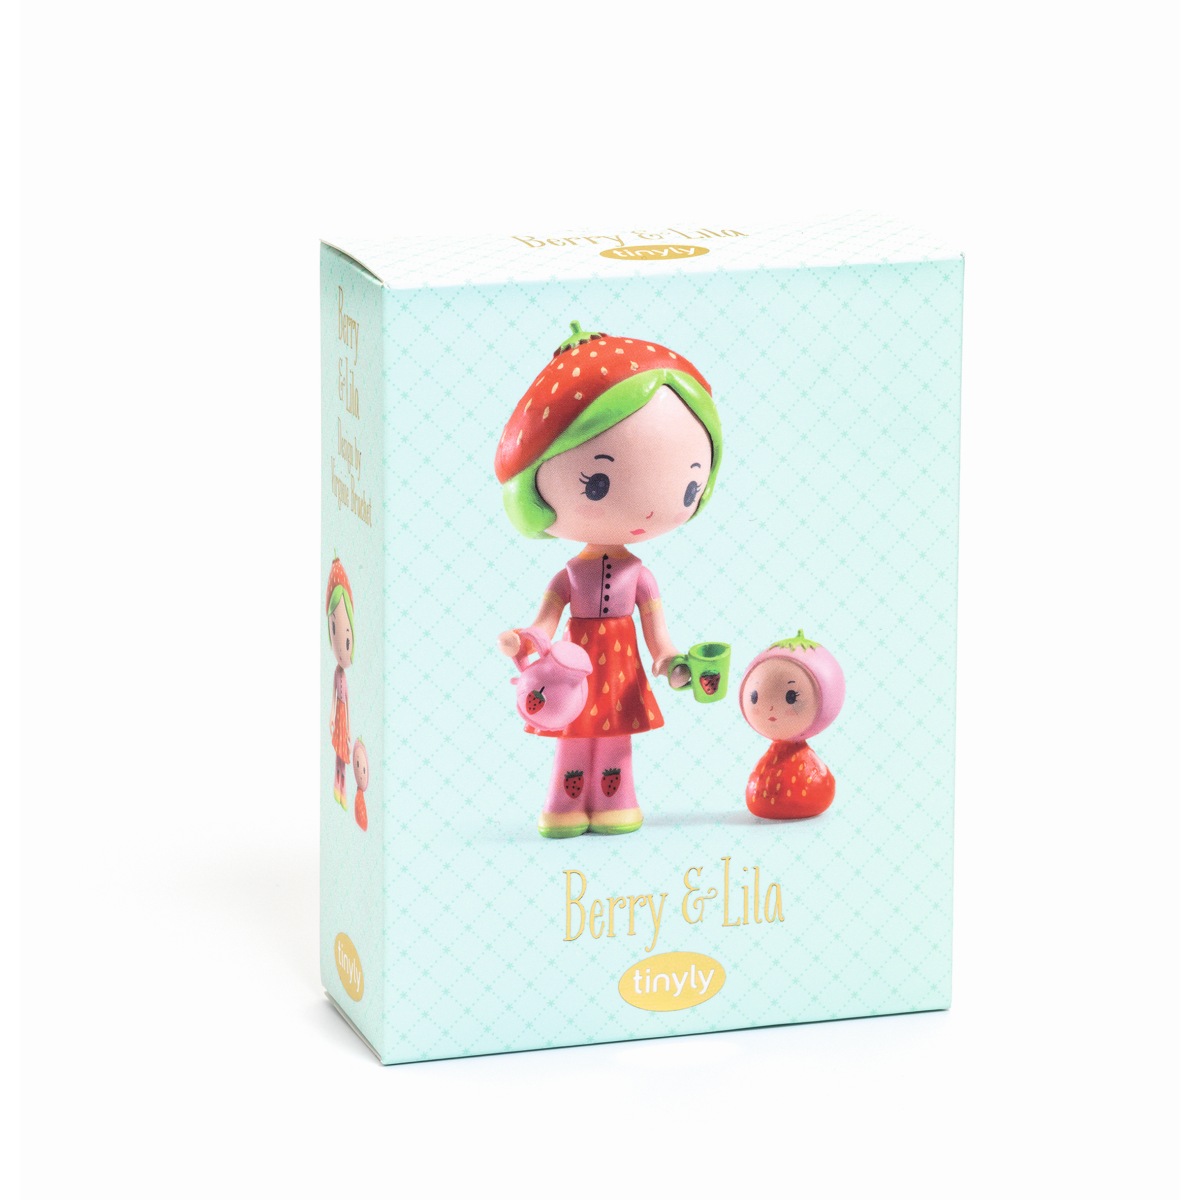 Tinyly - Berry & Lila